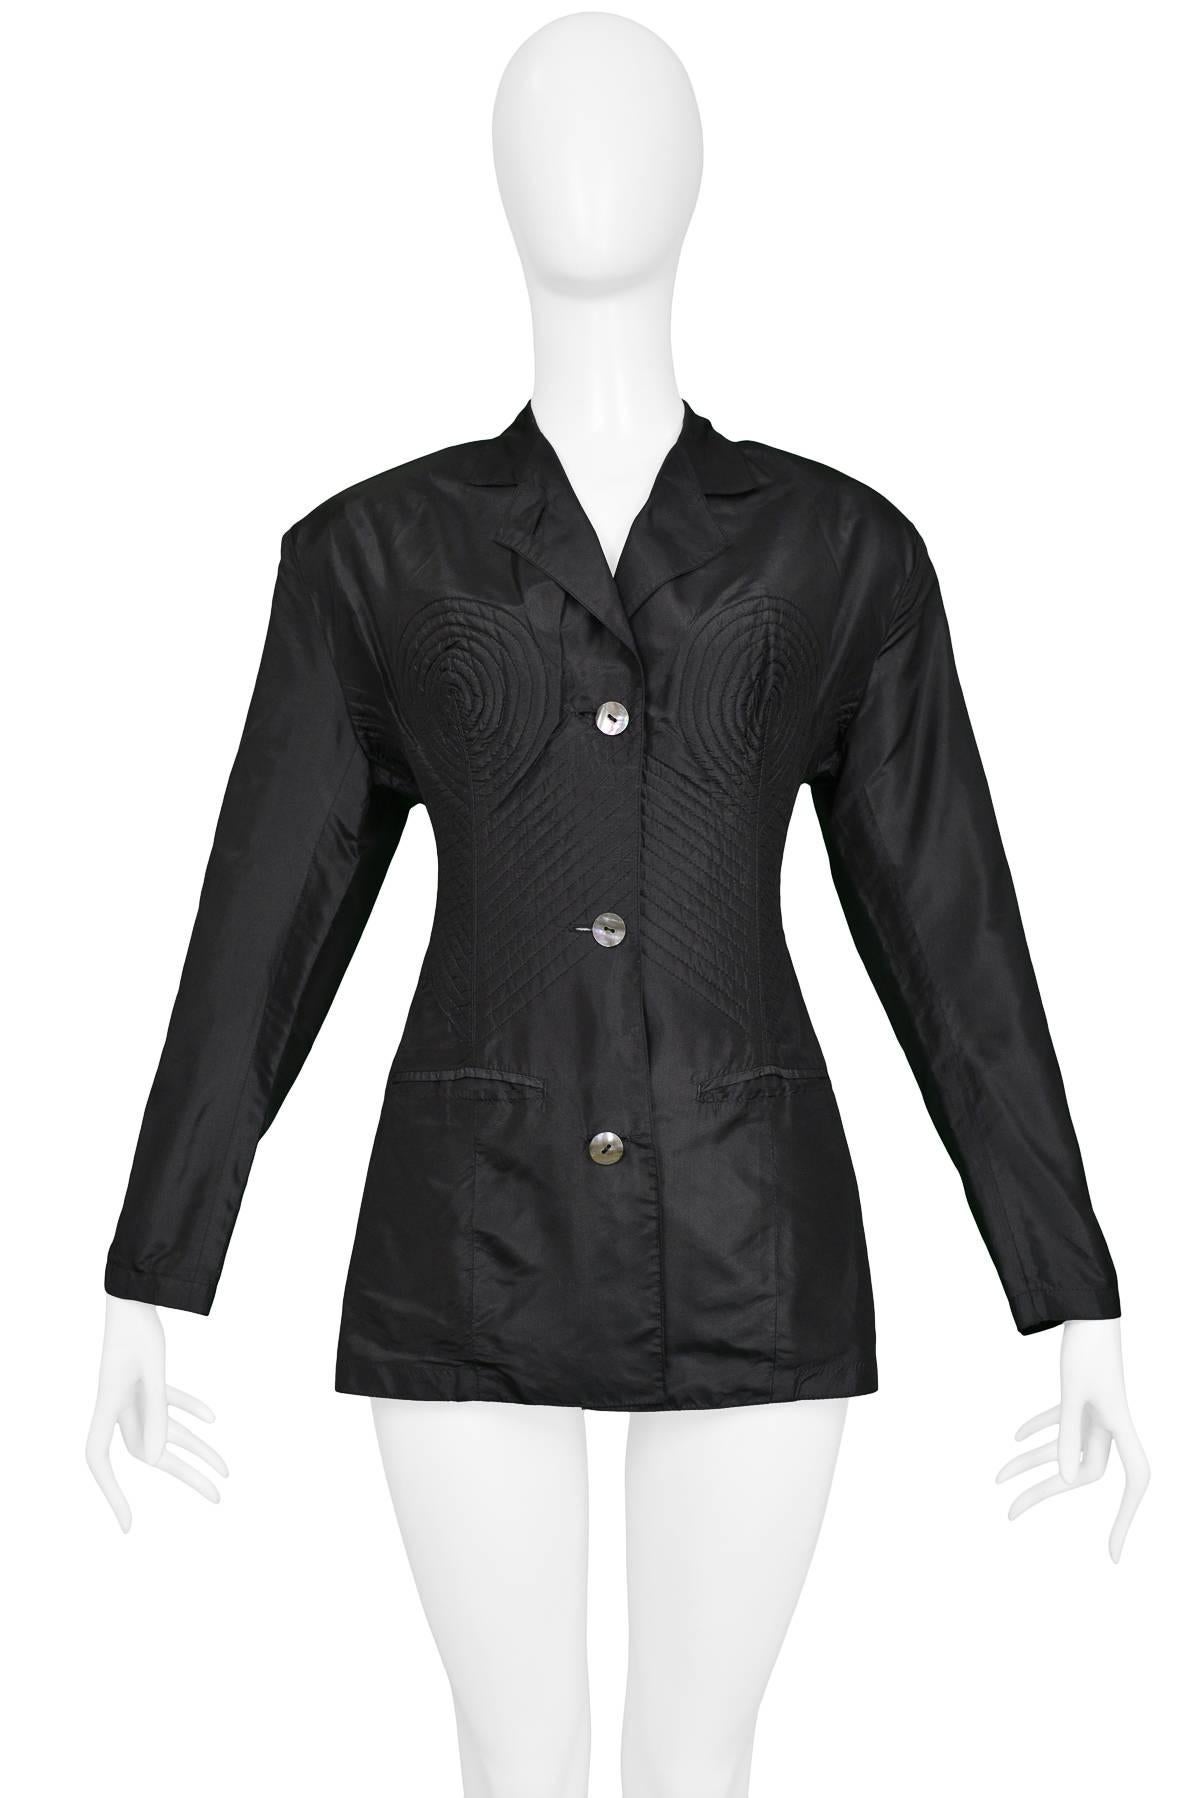 Resurrection Vintage is excited to offer a vintage Jean Paul Gaultier black fitted jacket featuring shell buttons down center front, circular cone detailing at the bust, diagonal stitching along the rib cage, and front pockets.

Jean Paul